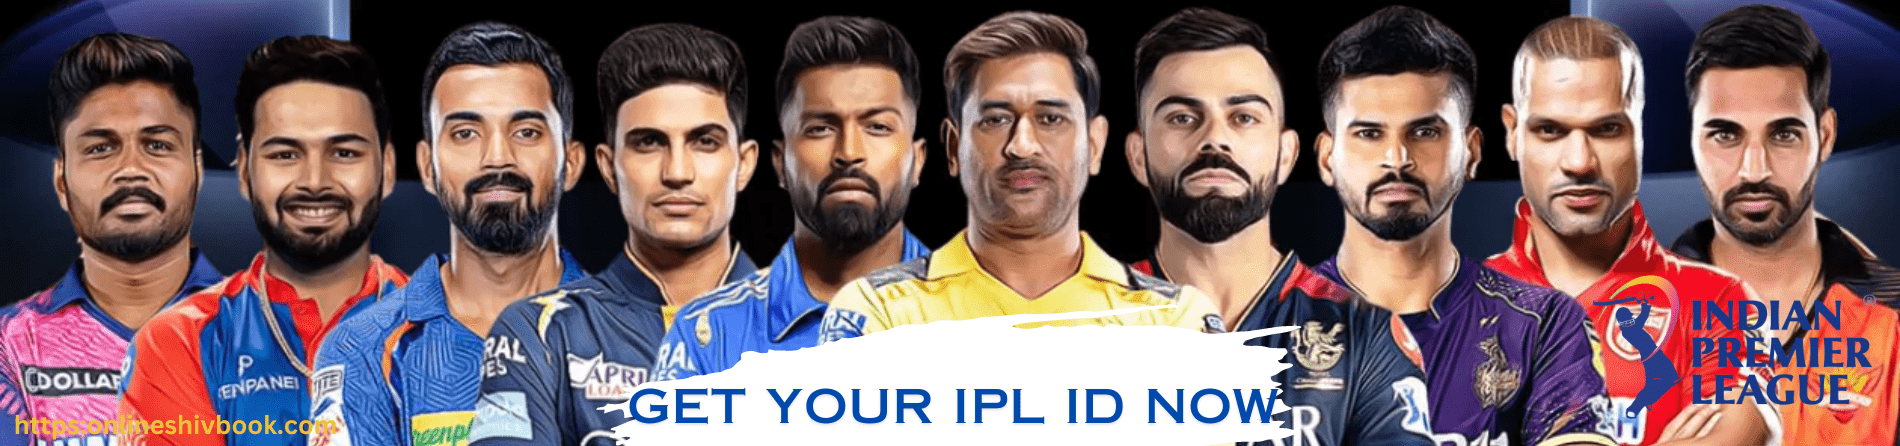 Get your IPL id fast